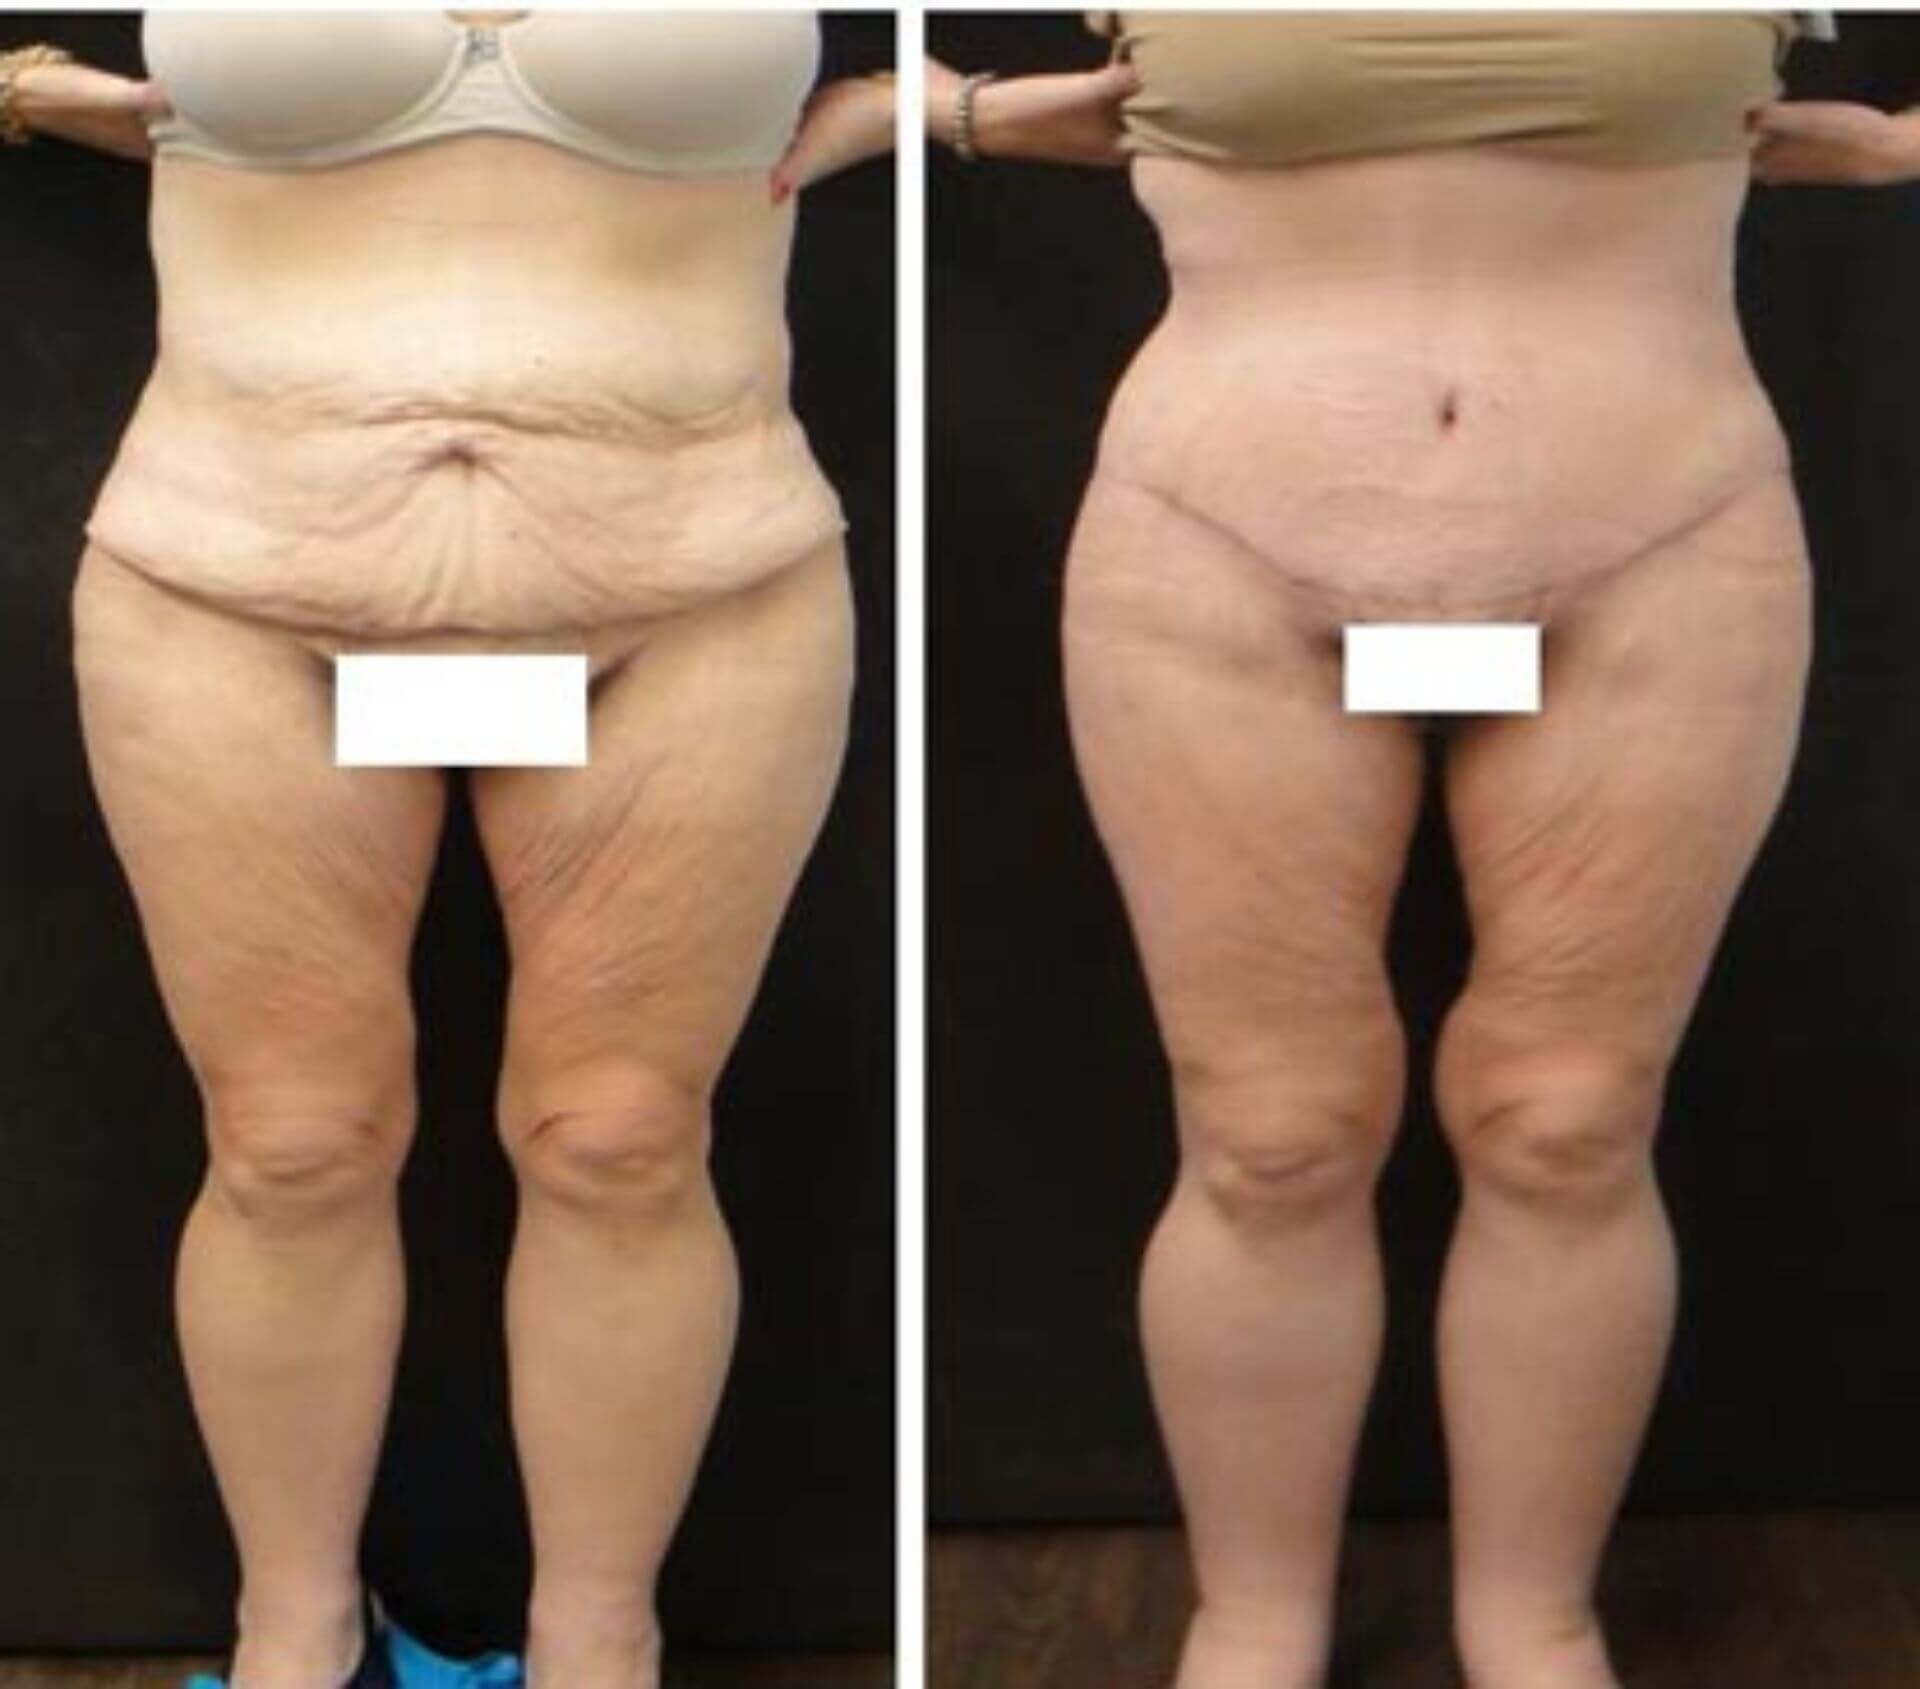 dr-penelope-treece-metairie-plastic-surgeon-before-after-abdominoplasty-6